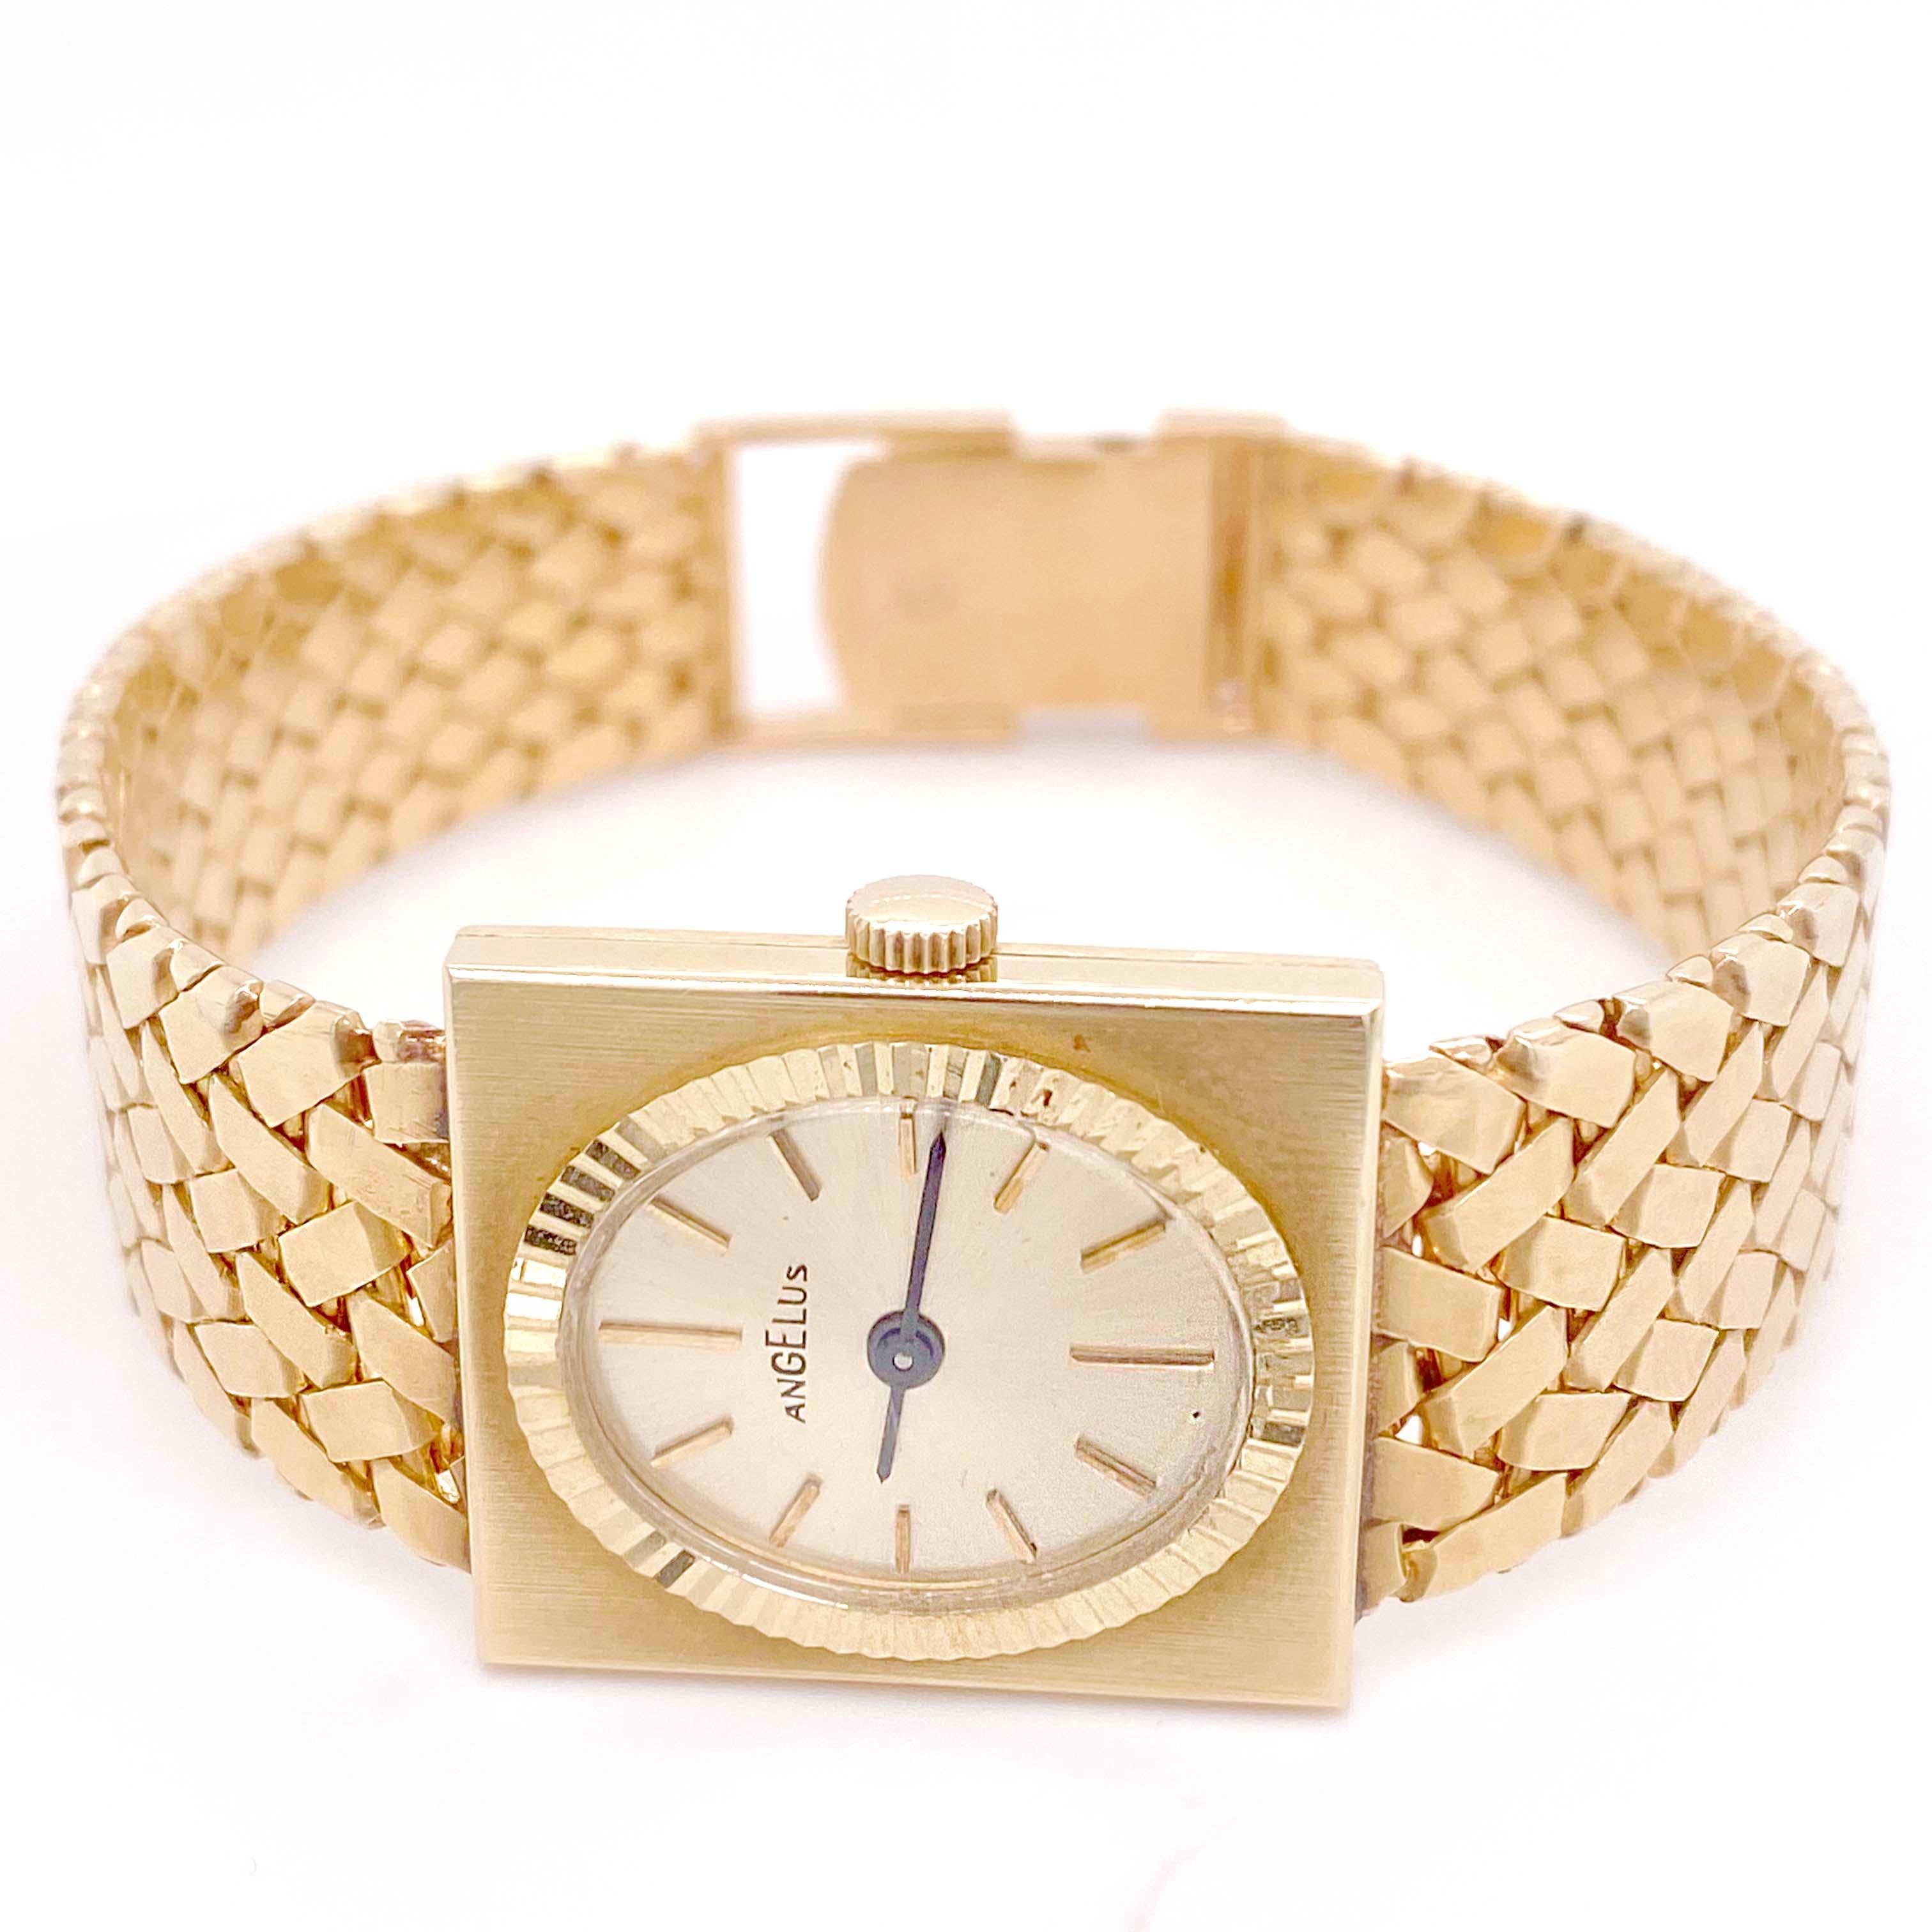 Rare 14 karat gold Angelus Watch. Angelus is made in Switzerland and has a long history of making Swiss timepieces. Born in the heart of the Swiss watchmaking center, La Chaux-de-Fonds, who makes Angelus watches has more than 100 year history.